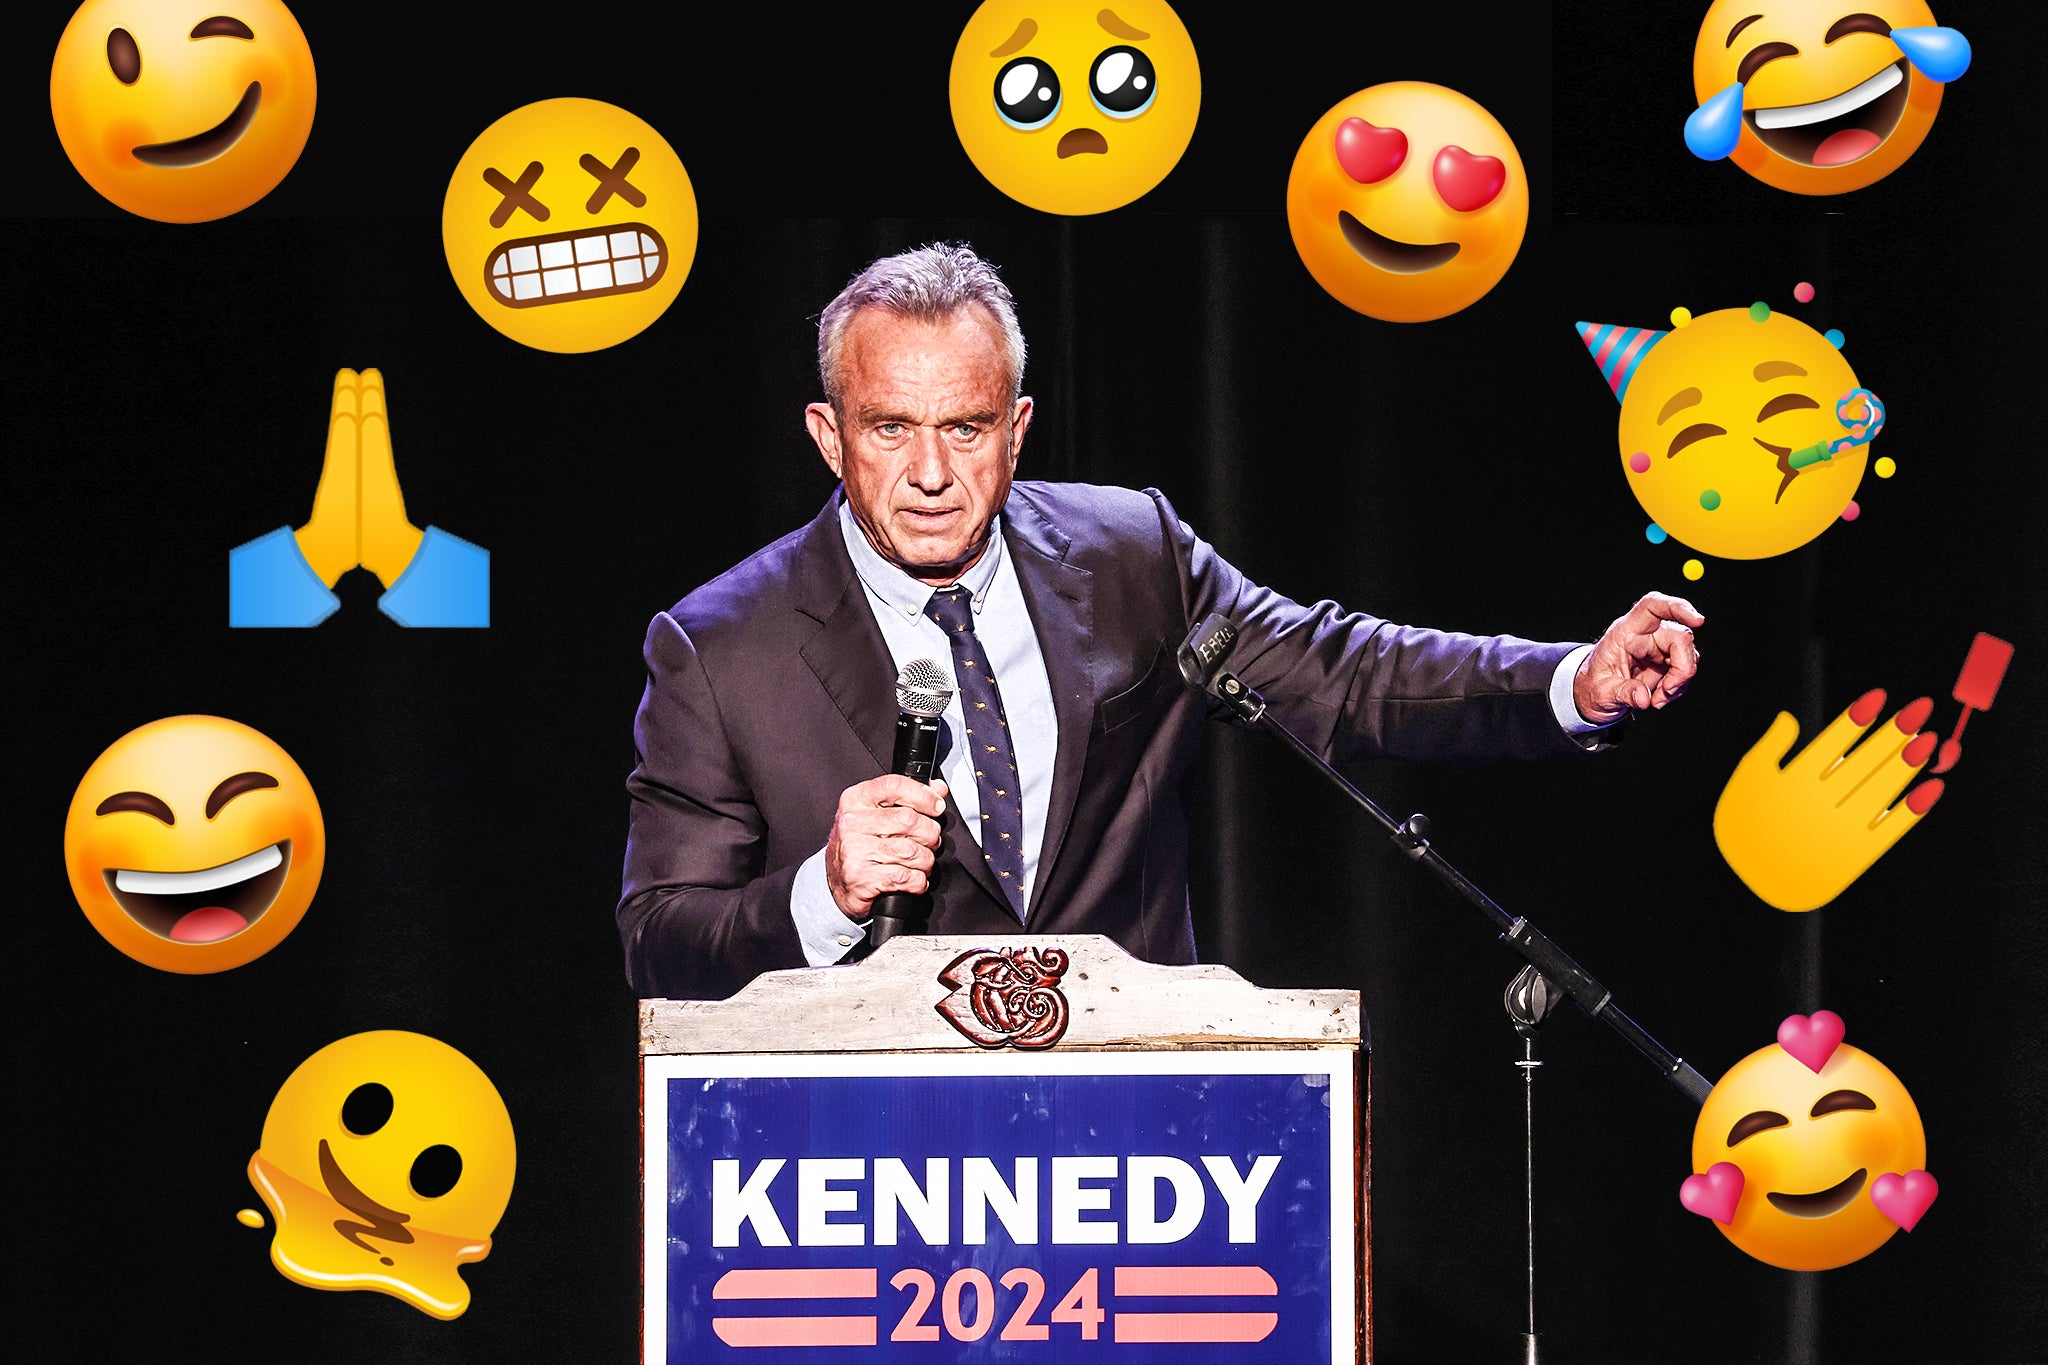 Robert F Kennedy Jr, who is running as an independent candidate in the 2024 US presidential election, is scheduled to announce his selection for vice president next week